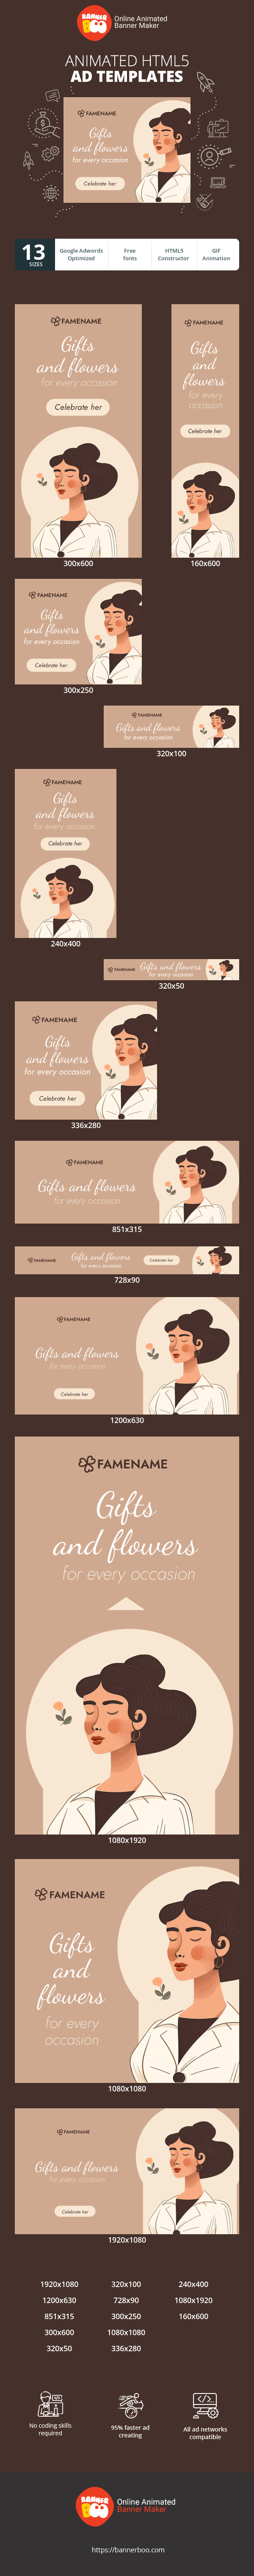 Шаблон рекламного банера — Gifts And Flowers For Every Occasion — Women's Day